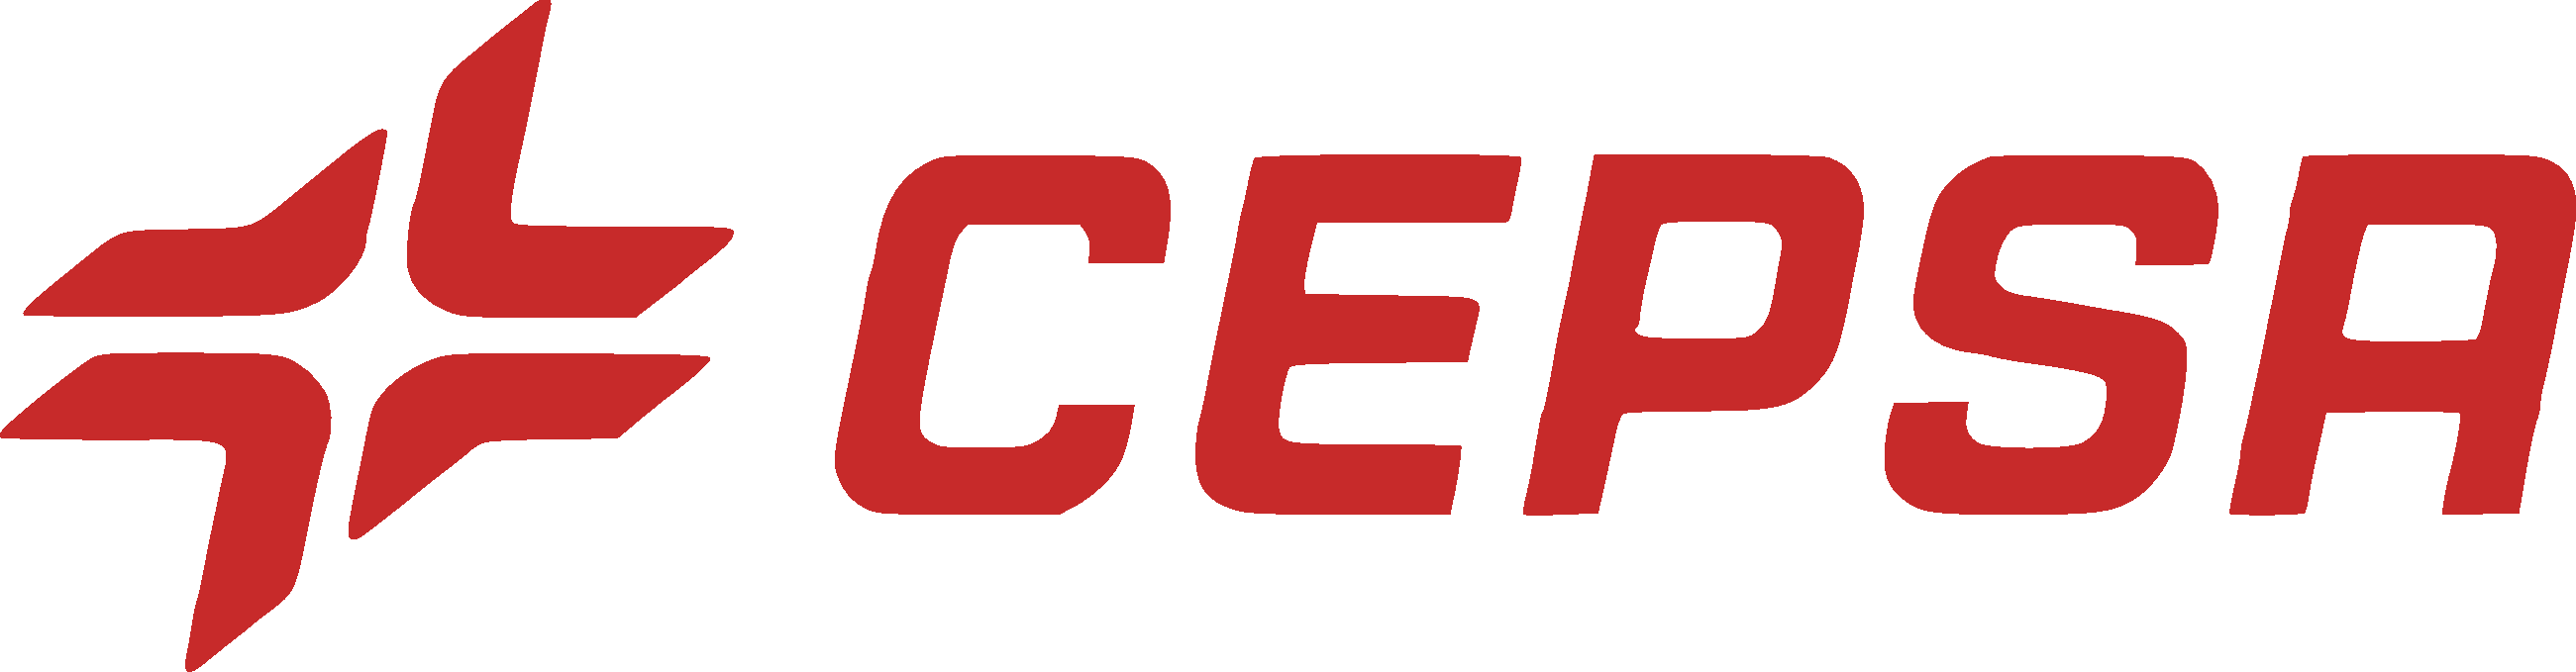 Cepsa automates IT to improve its operational efficiency with Red Hat